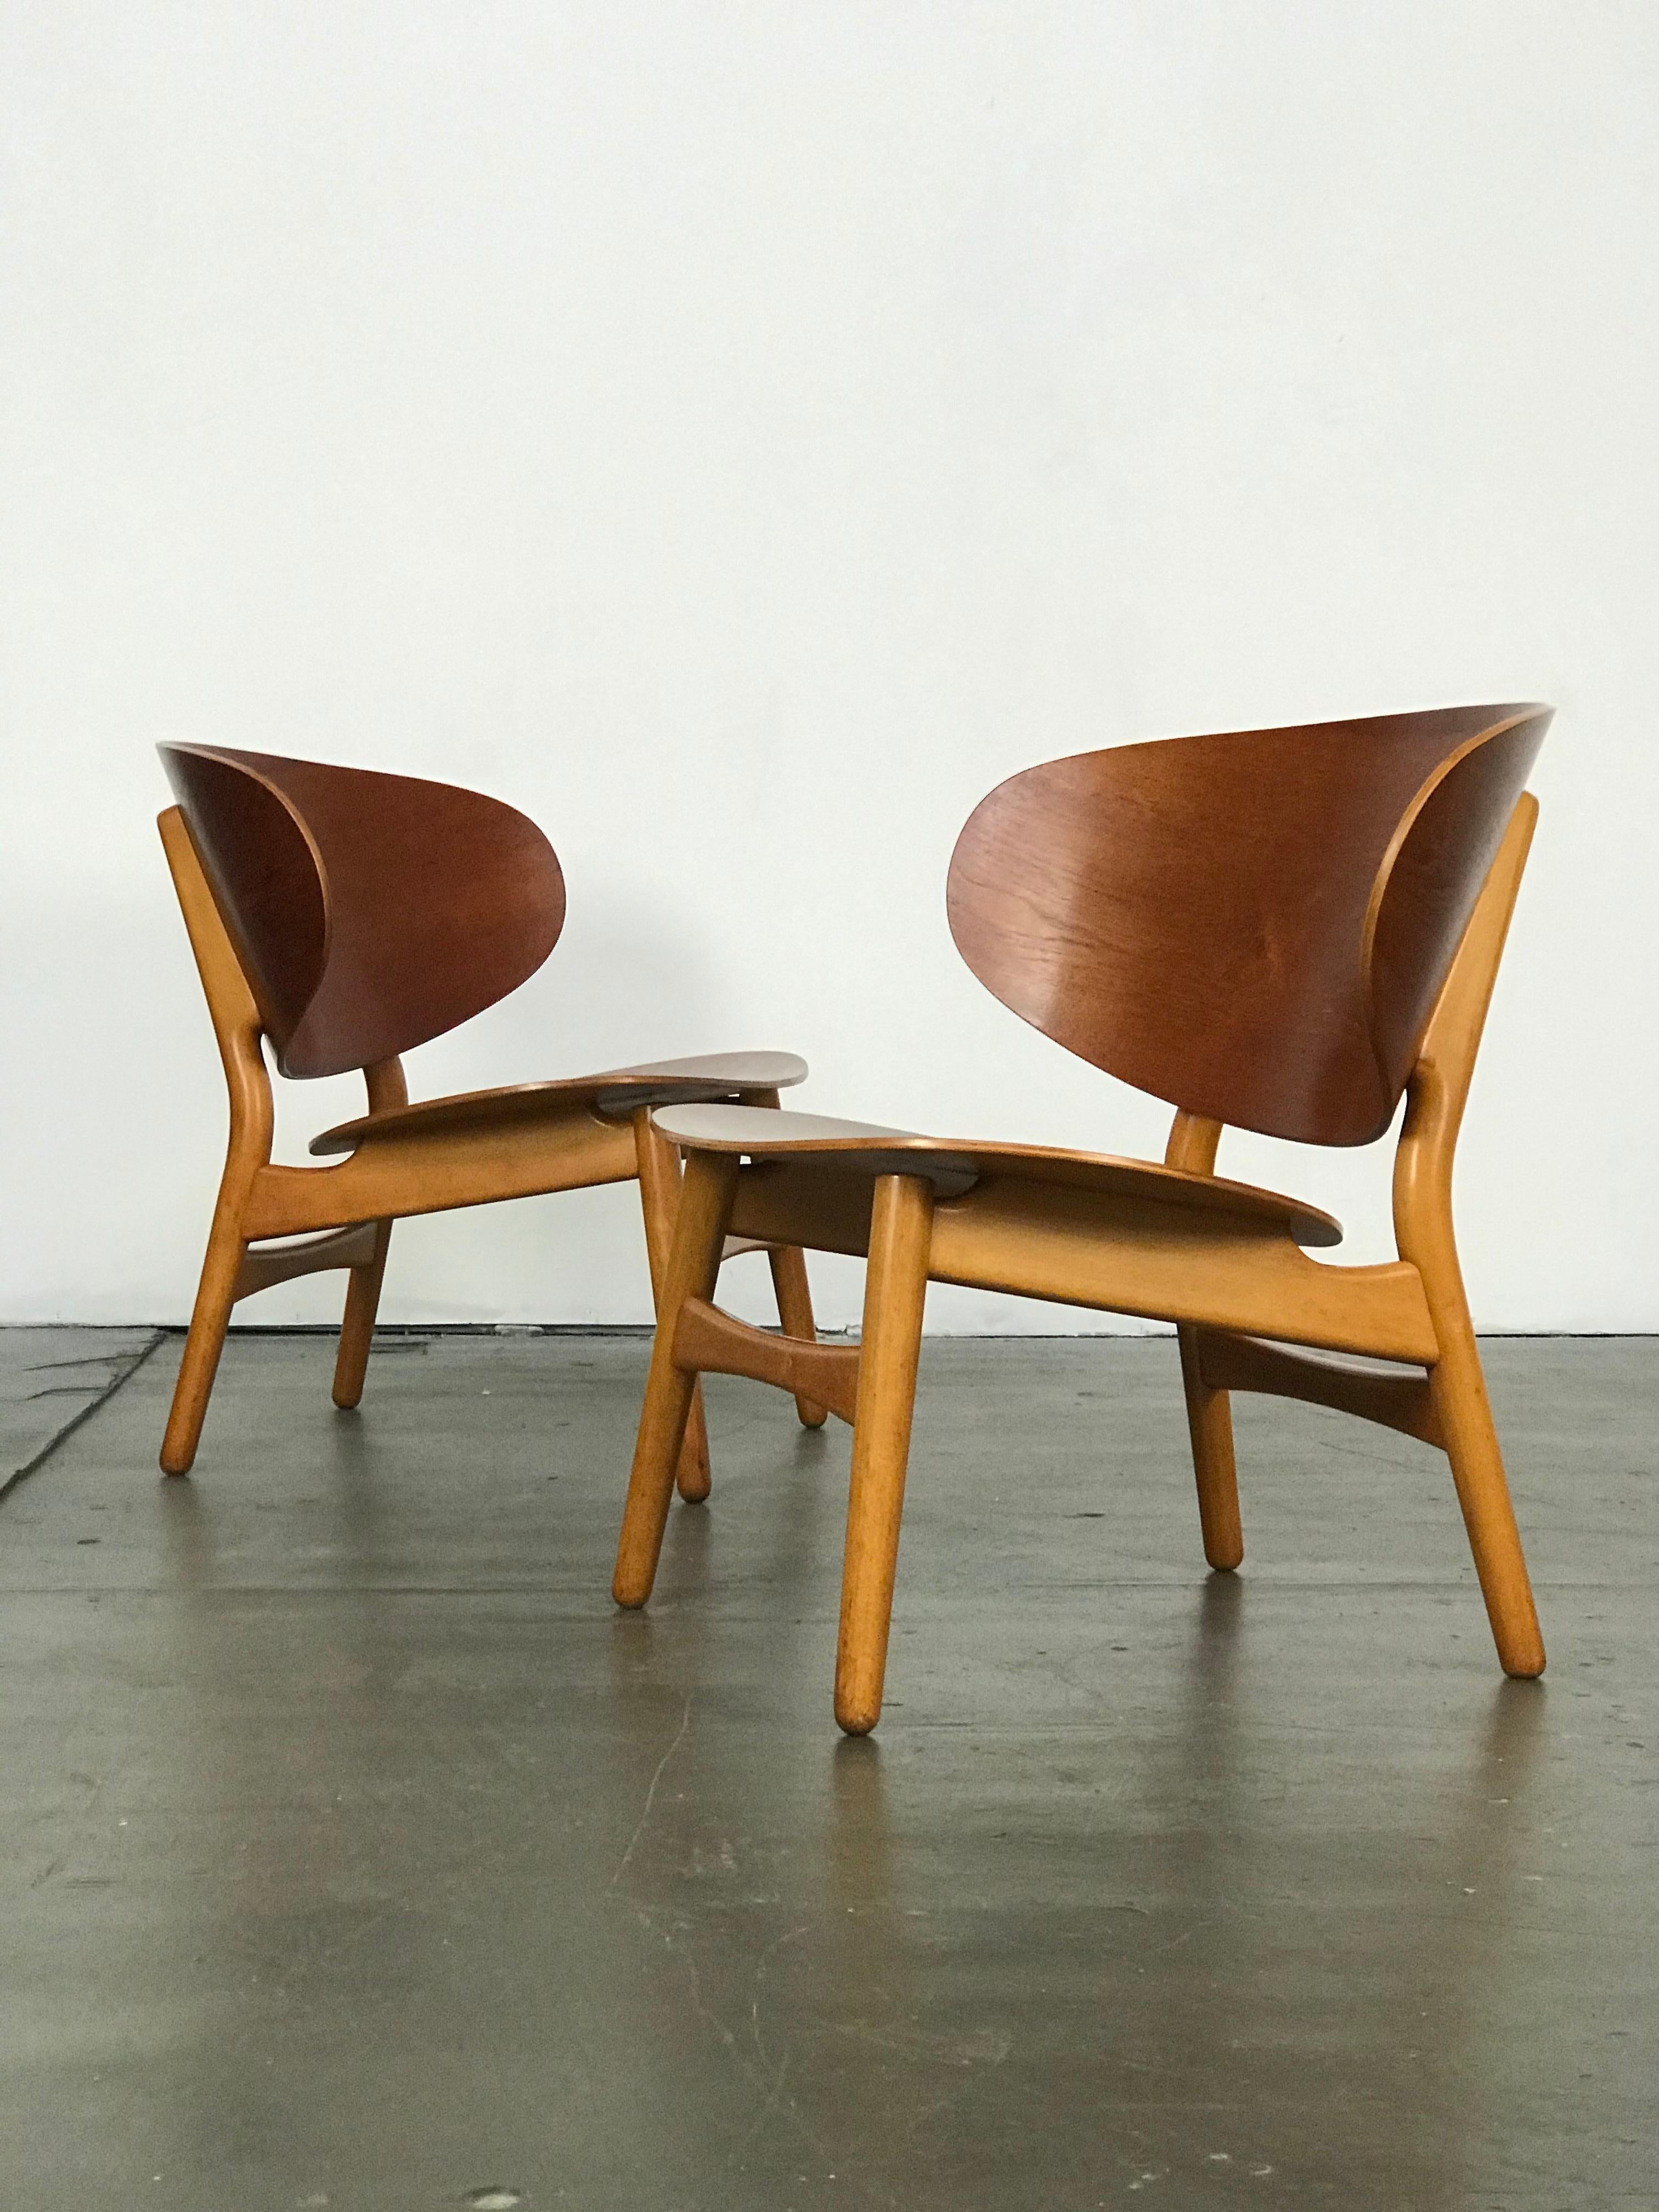 Early pair of Hans Wegner Shell lounge chairs. Designed in 1948. These have been recently restored, yet still show some age/wear. The chairs are made of beautiful contrasting wood types; teak and beech. FH stamps under each chair. Early photos of